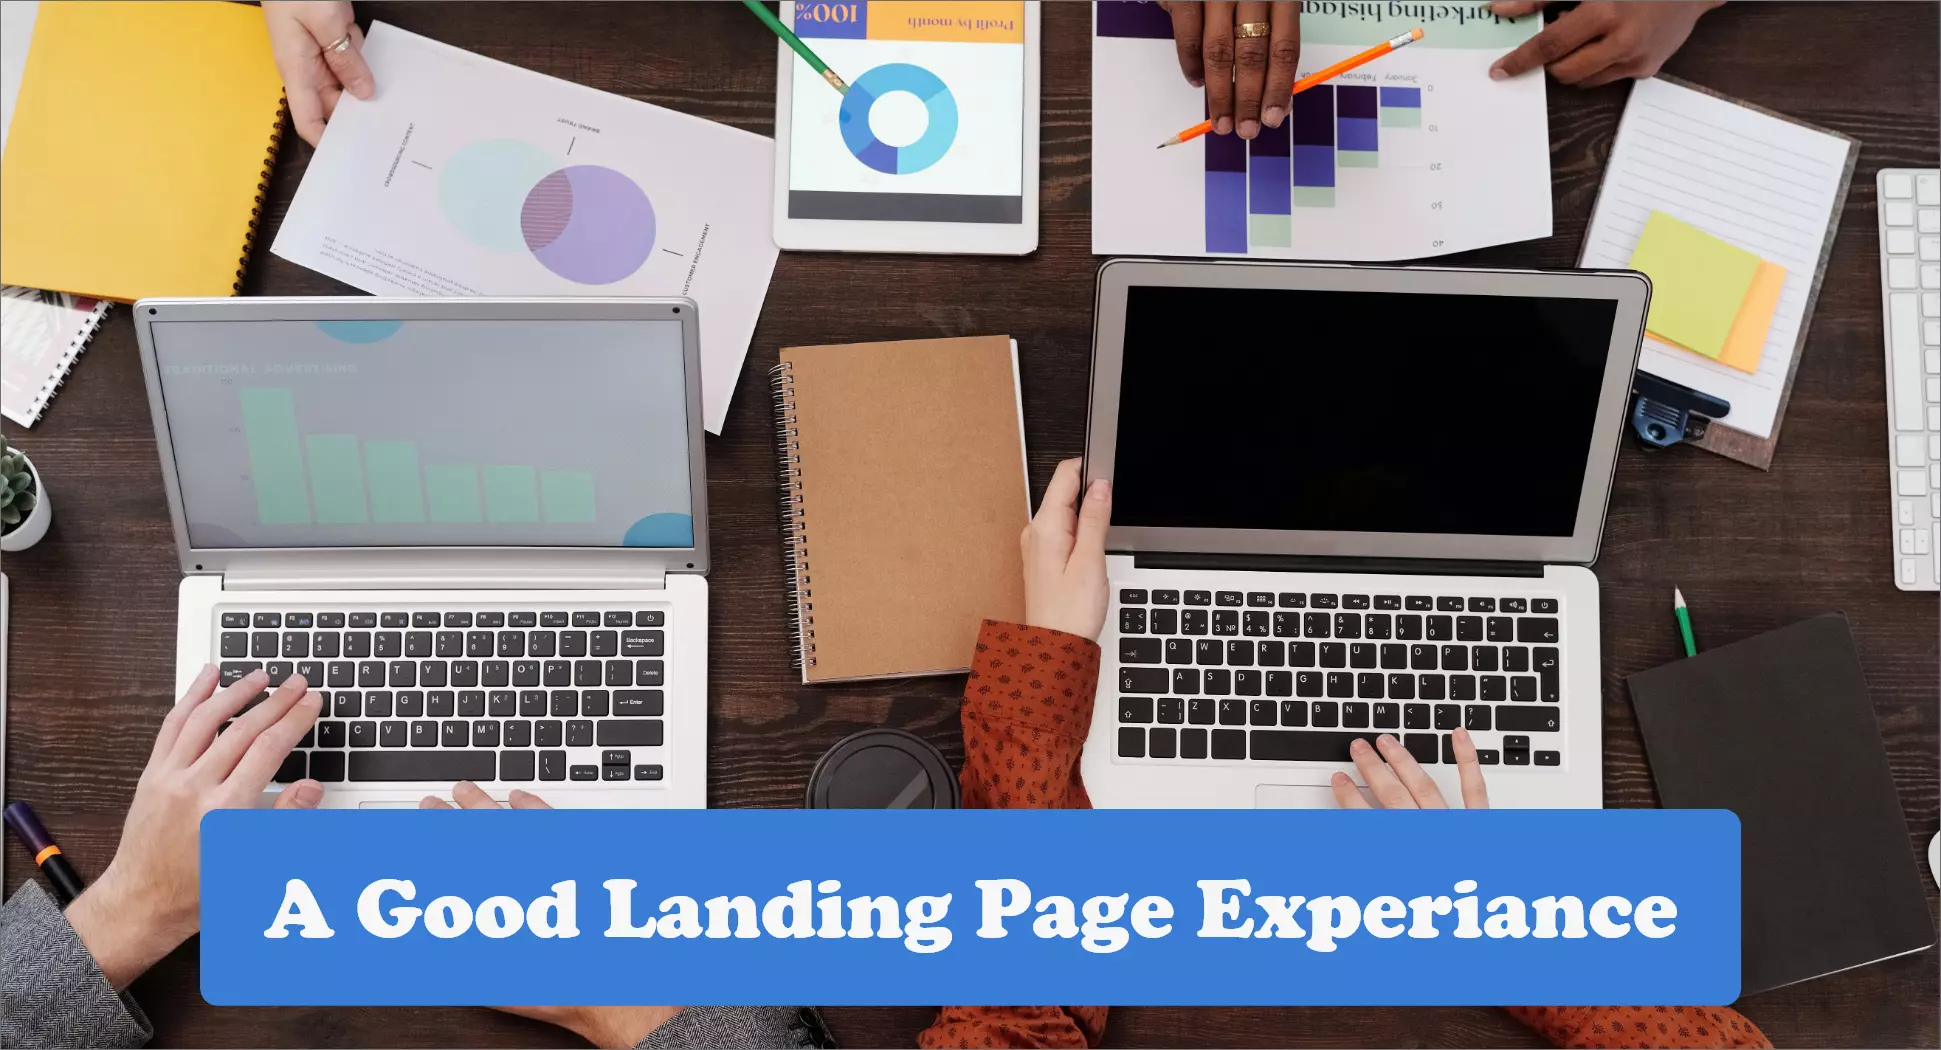 explore Which Attributes Describe a Good Landing Page Experience